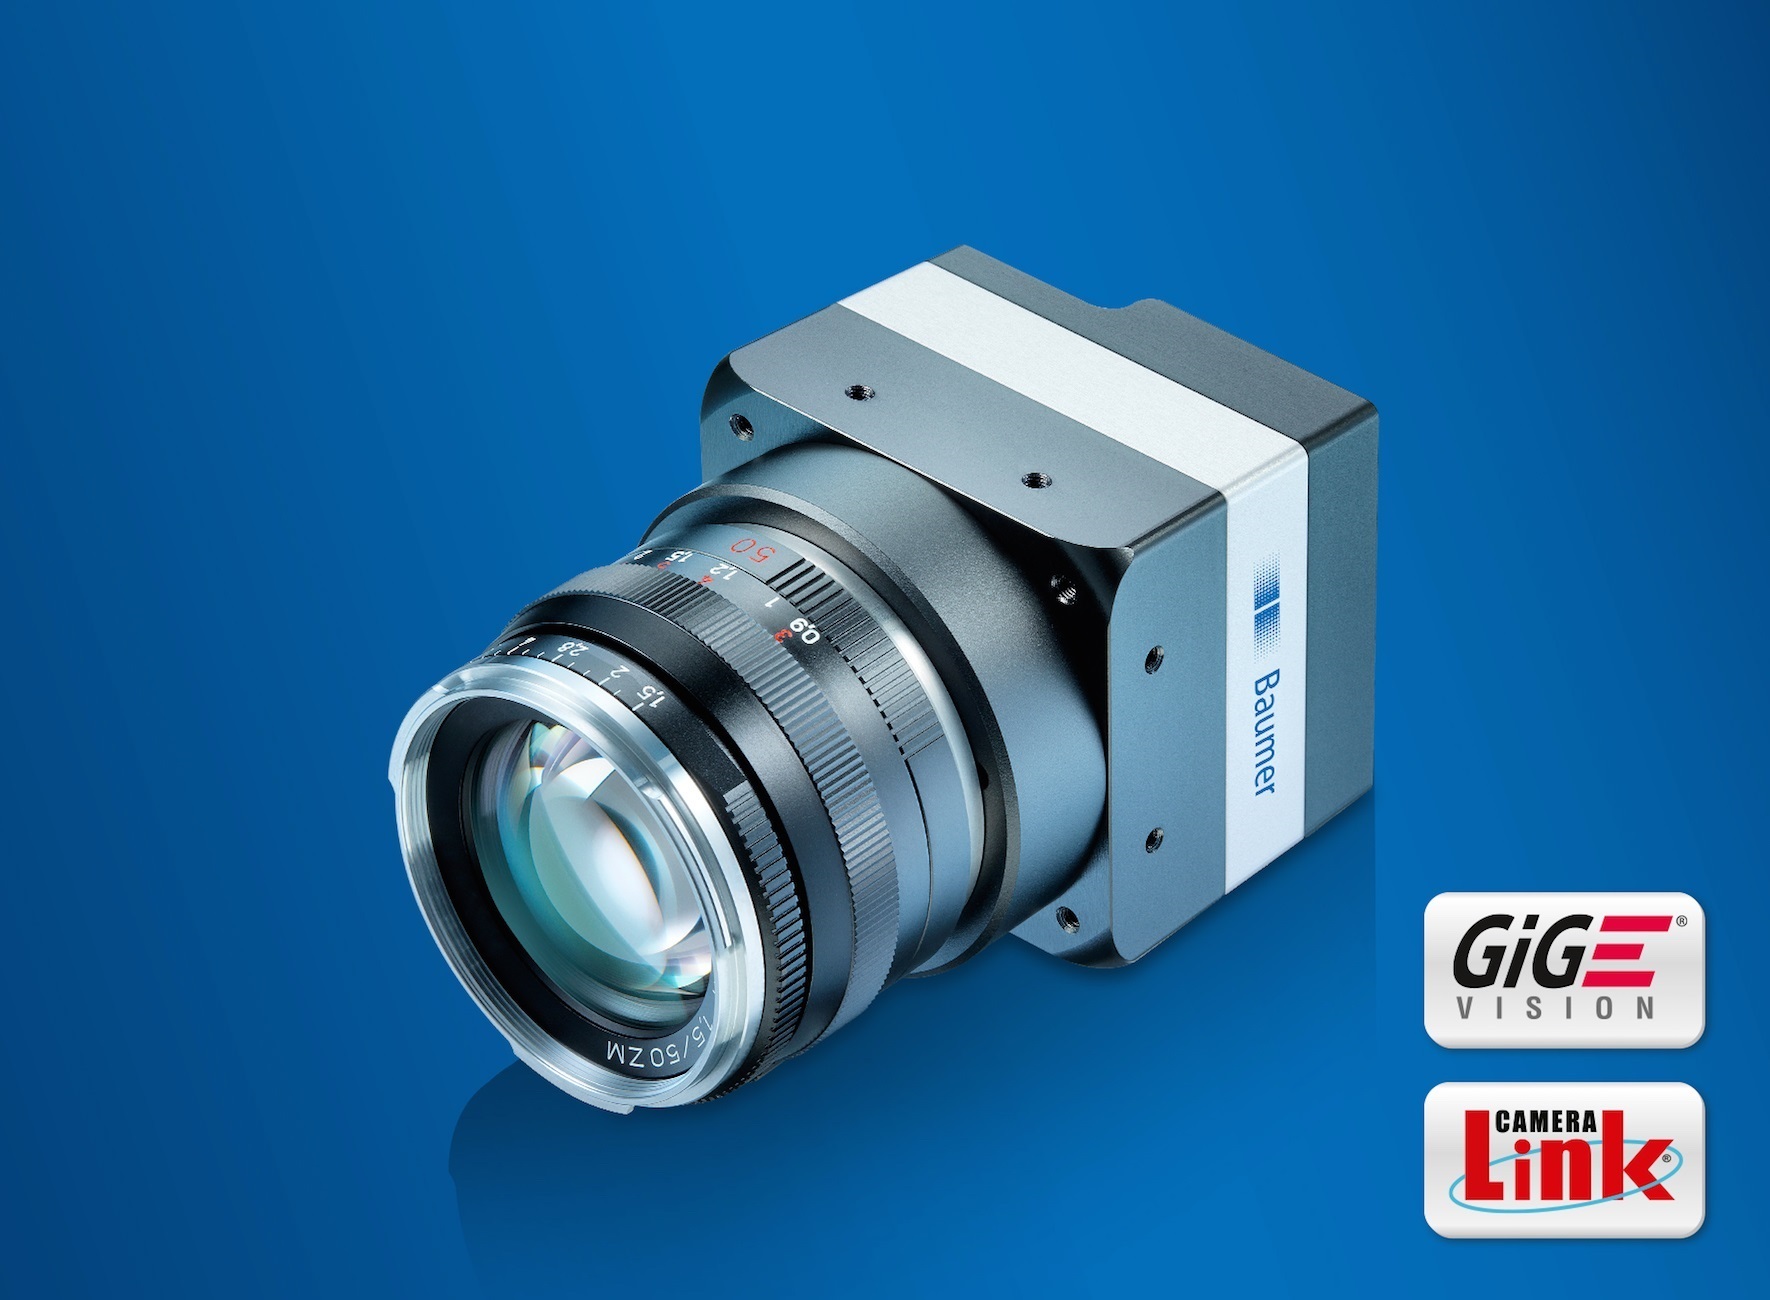 New 25 megapixel CMOS cameras of the LX series enable high-precision inspection at high throughput